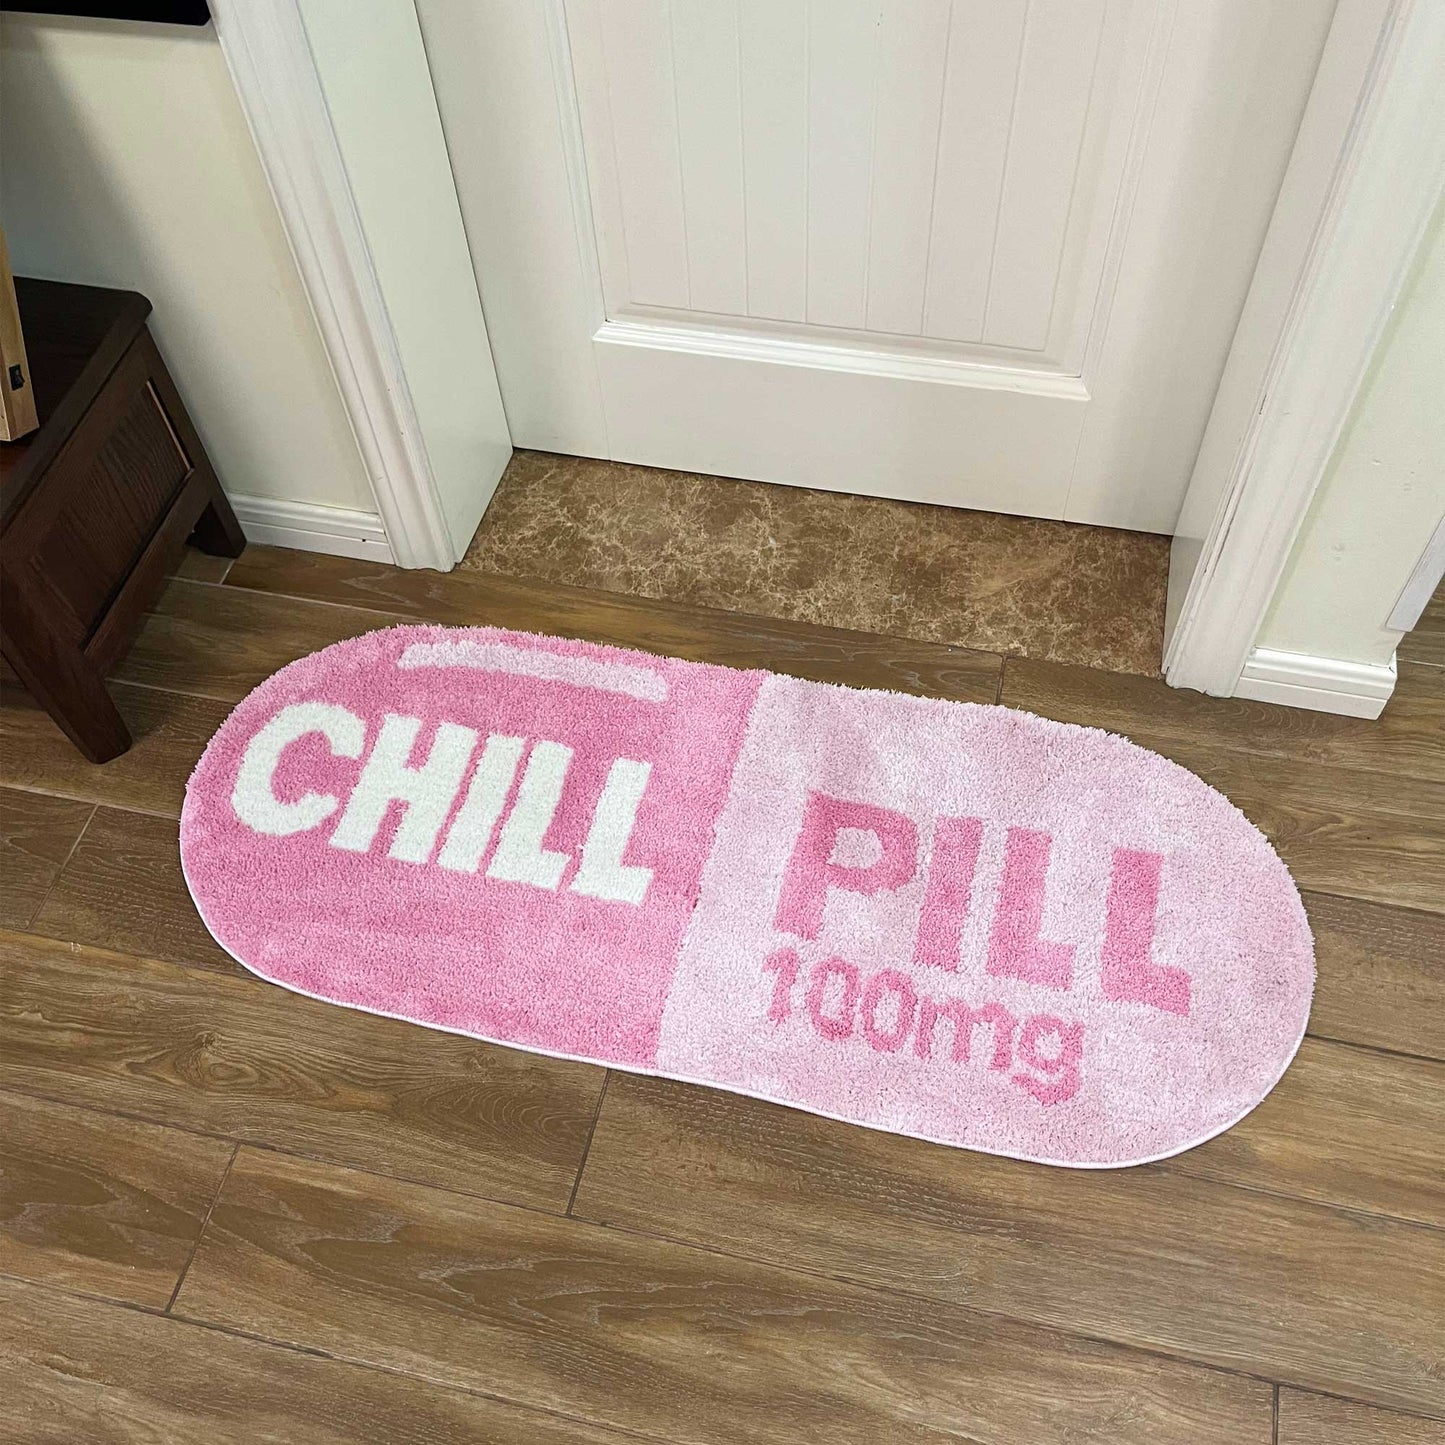 Tufted Rug Pink Chill Pill Rug Front in an Entryway